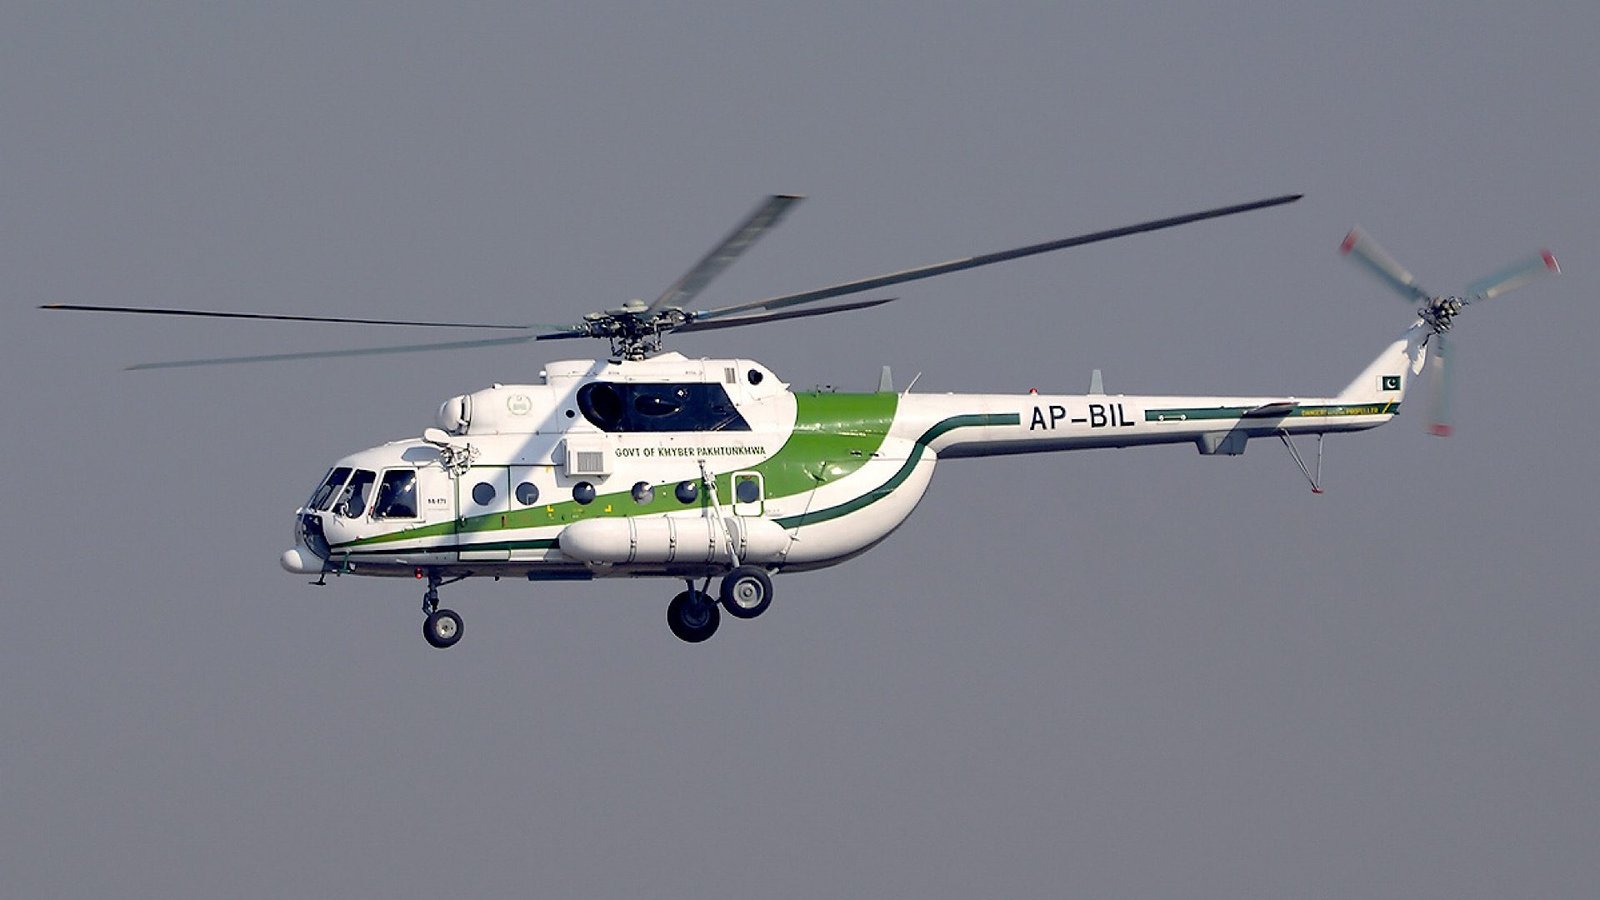 KP Govt’s Helicopter to be Converted into Air Ambulance